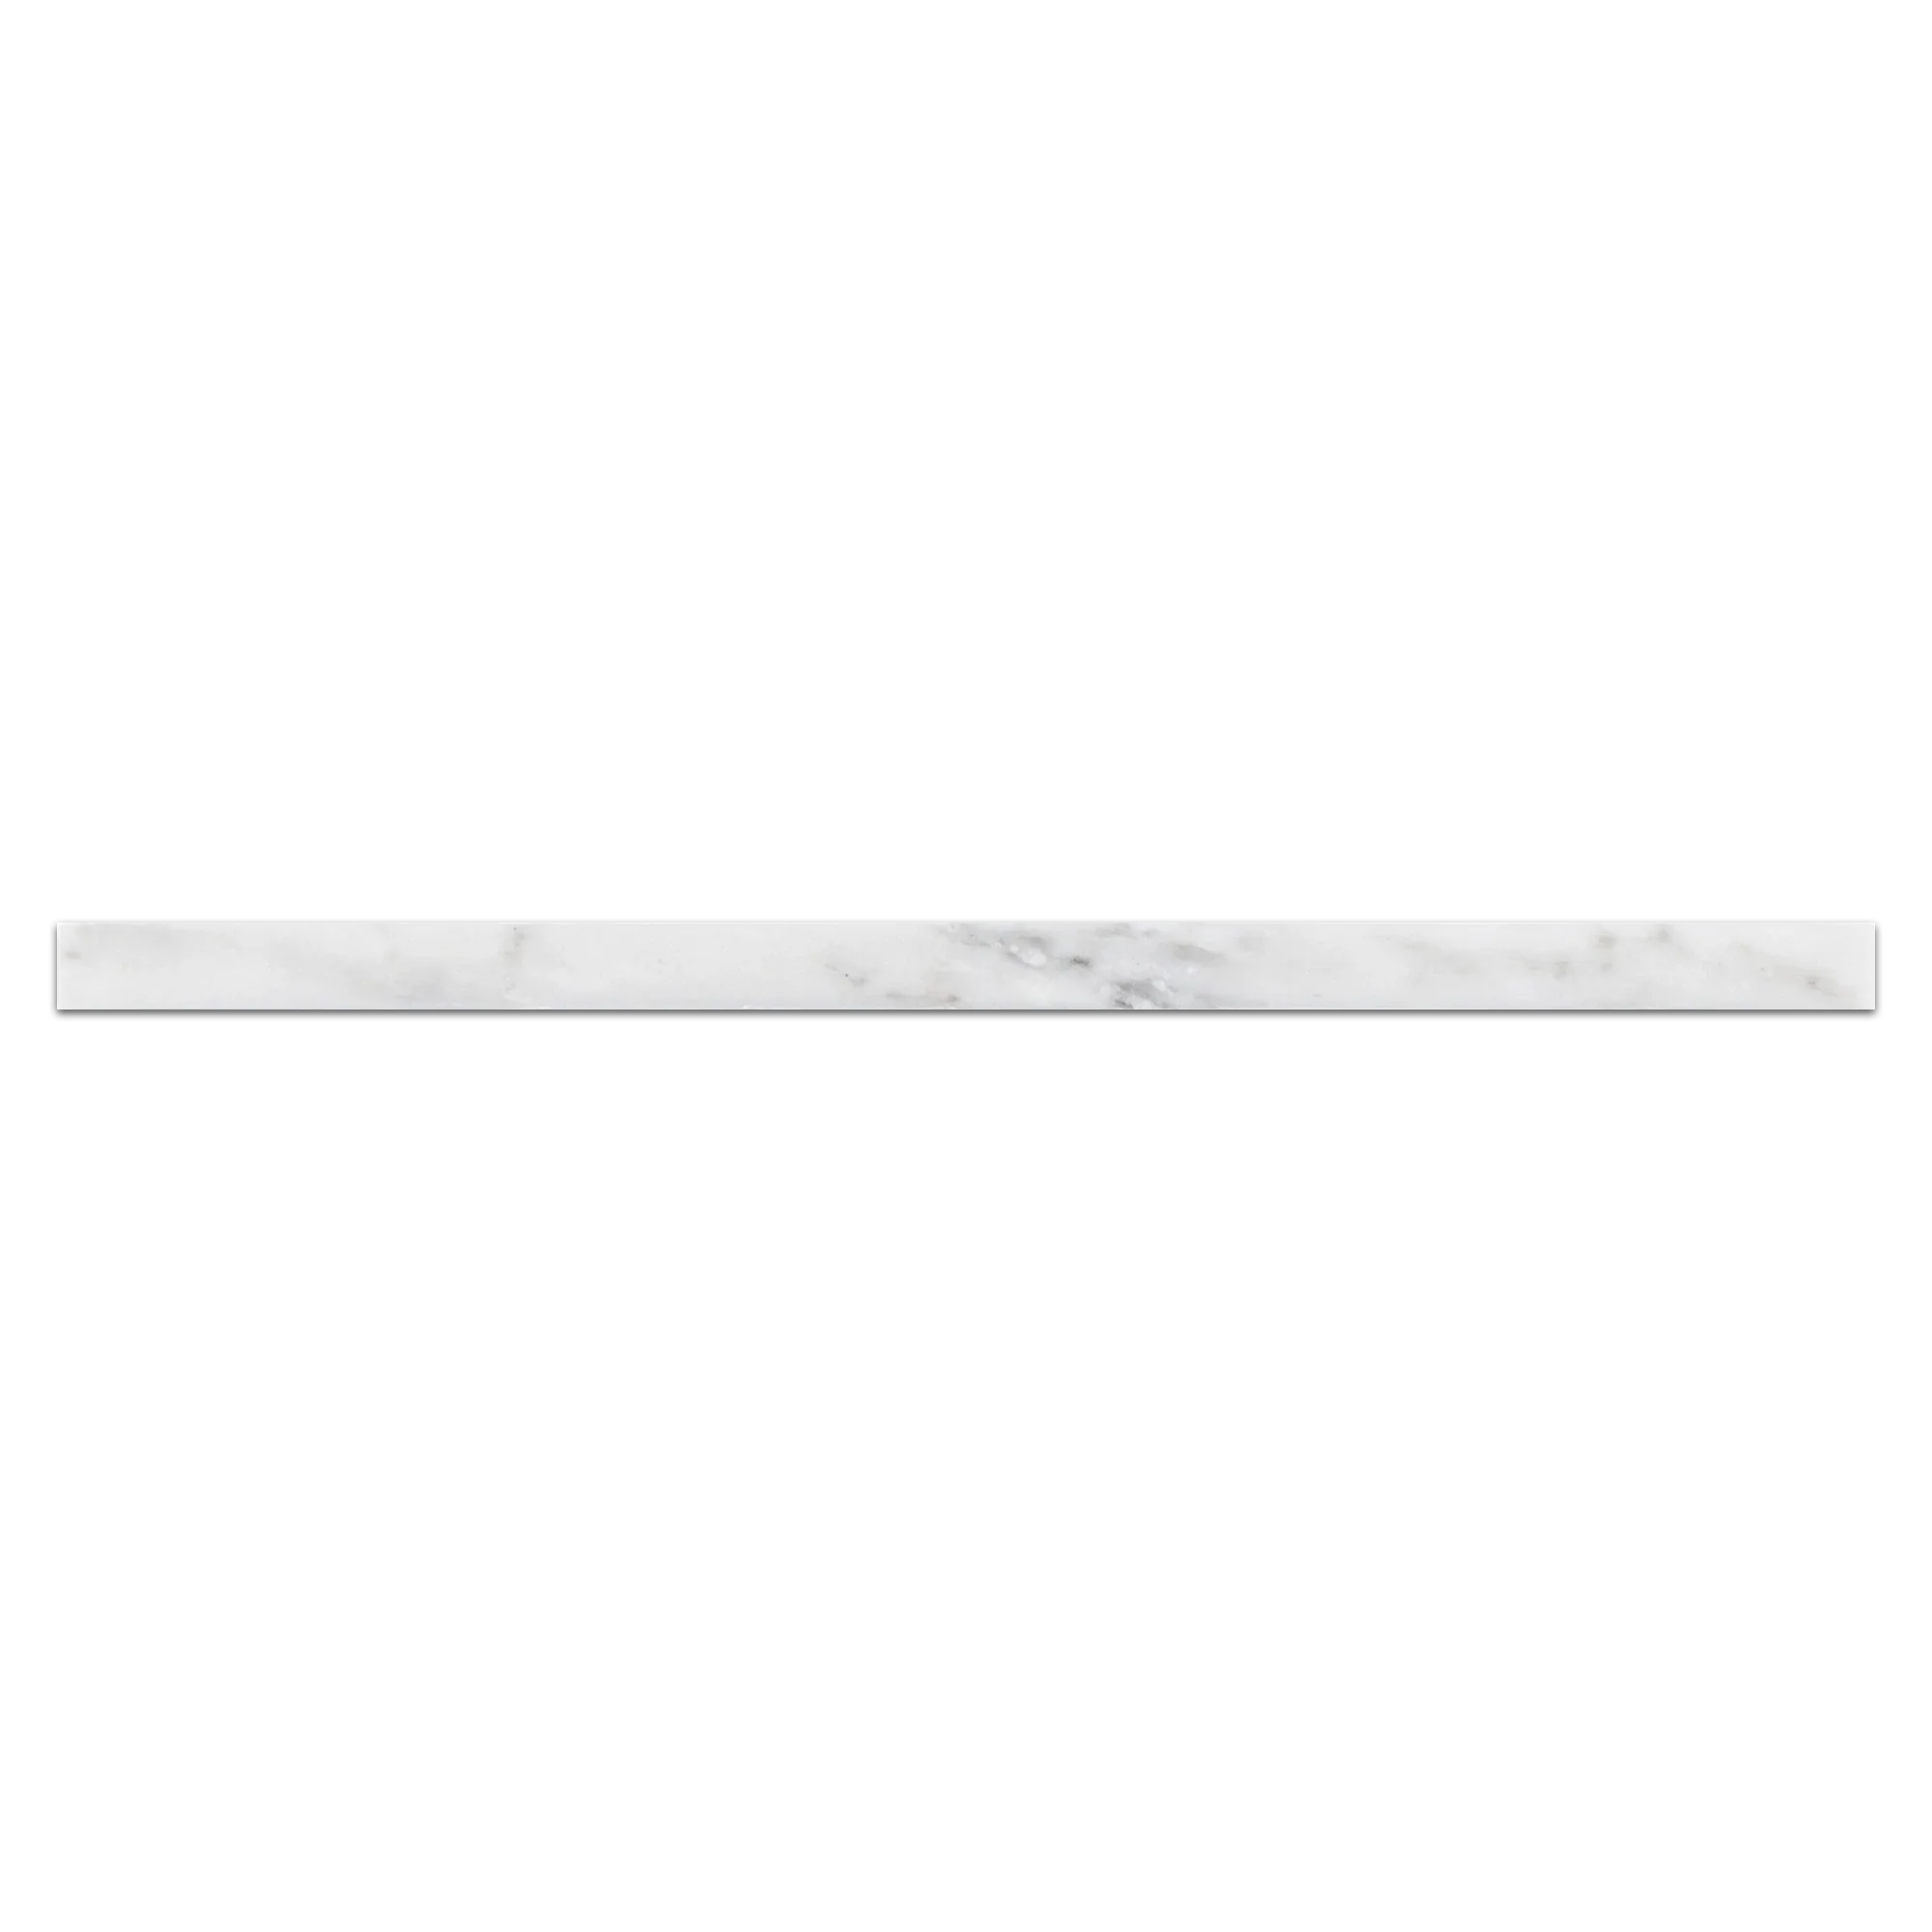 Elon Pearl White Marble Flat Liner Tile 0.5625x12x0.8125 Polished - AM8629P Surface Group International Product